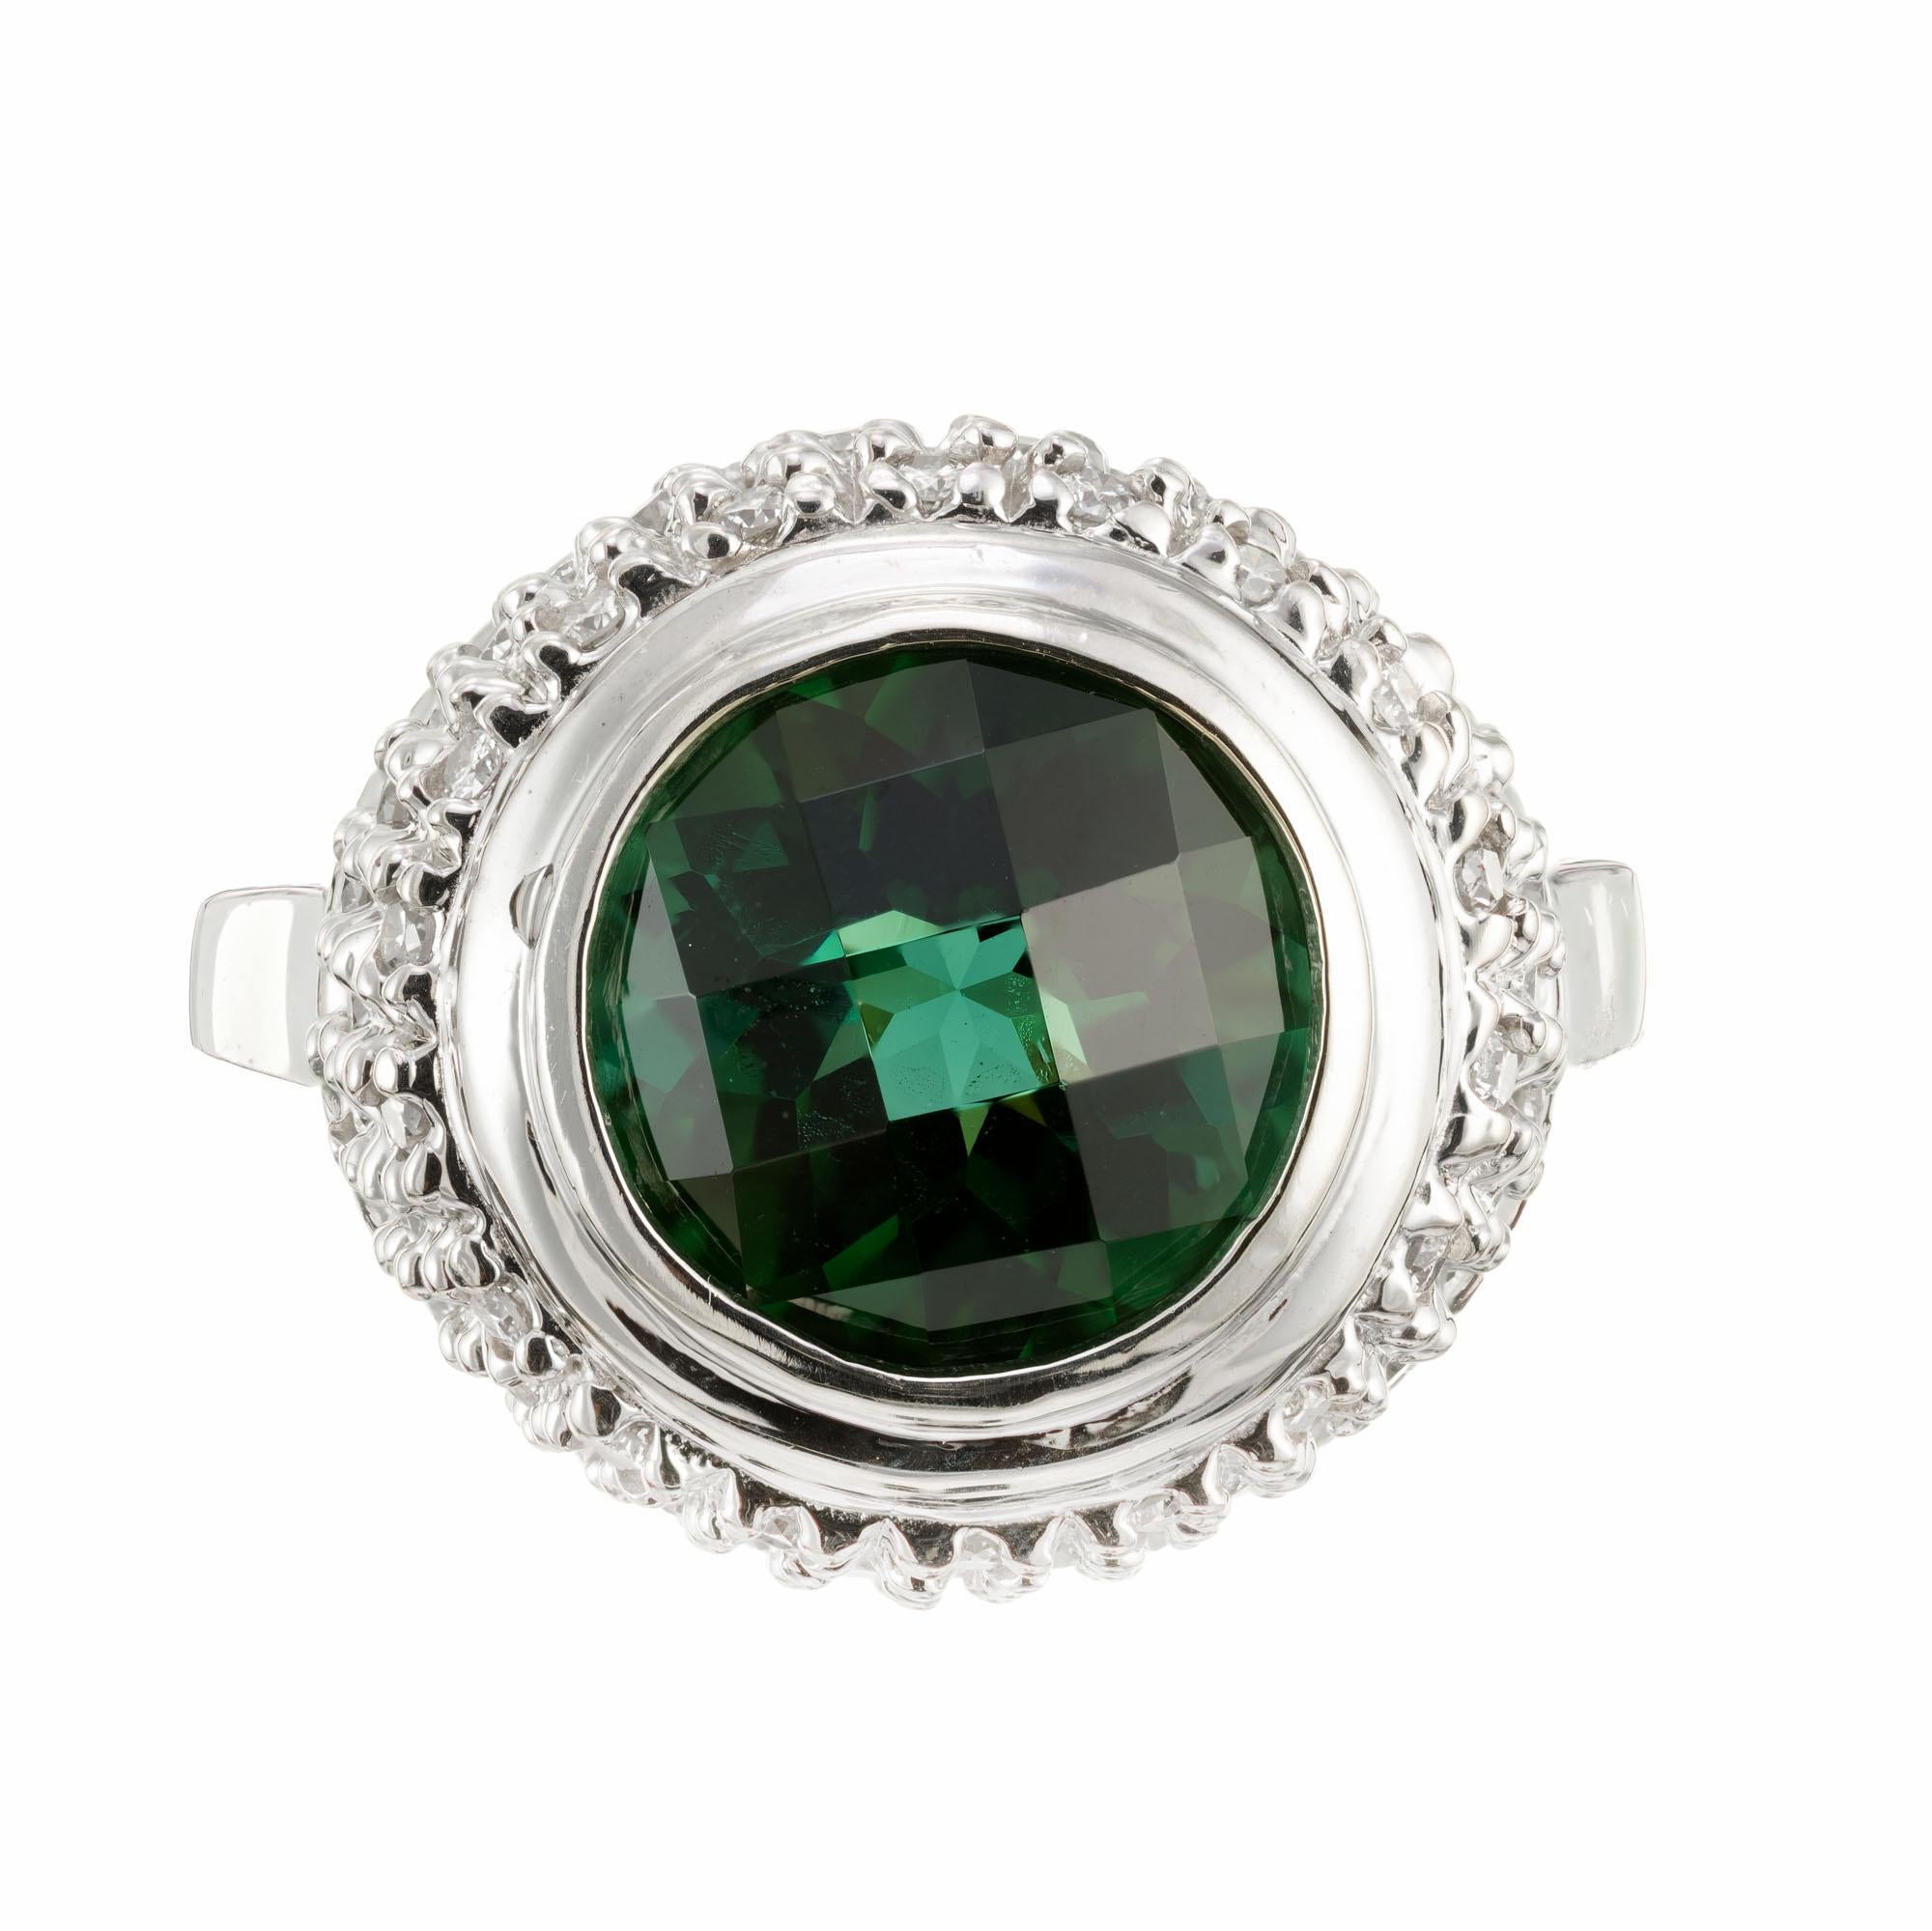 Tourmaline and diamond ring. 3.00ct round center tourmaline, set in a 14k white gold raised top setting with 60 full cut accent diamonds. 

1 genuine green Tourmaline, approx. total weight 3.00cts, 10mm round
Approx. 60 full cut diamonds, approx.